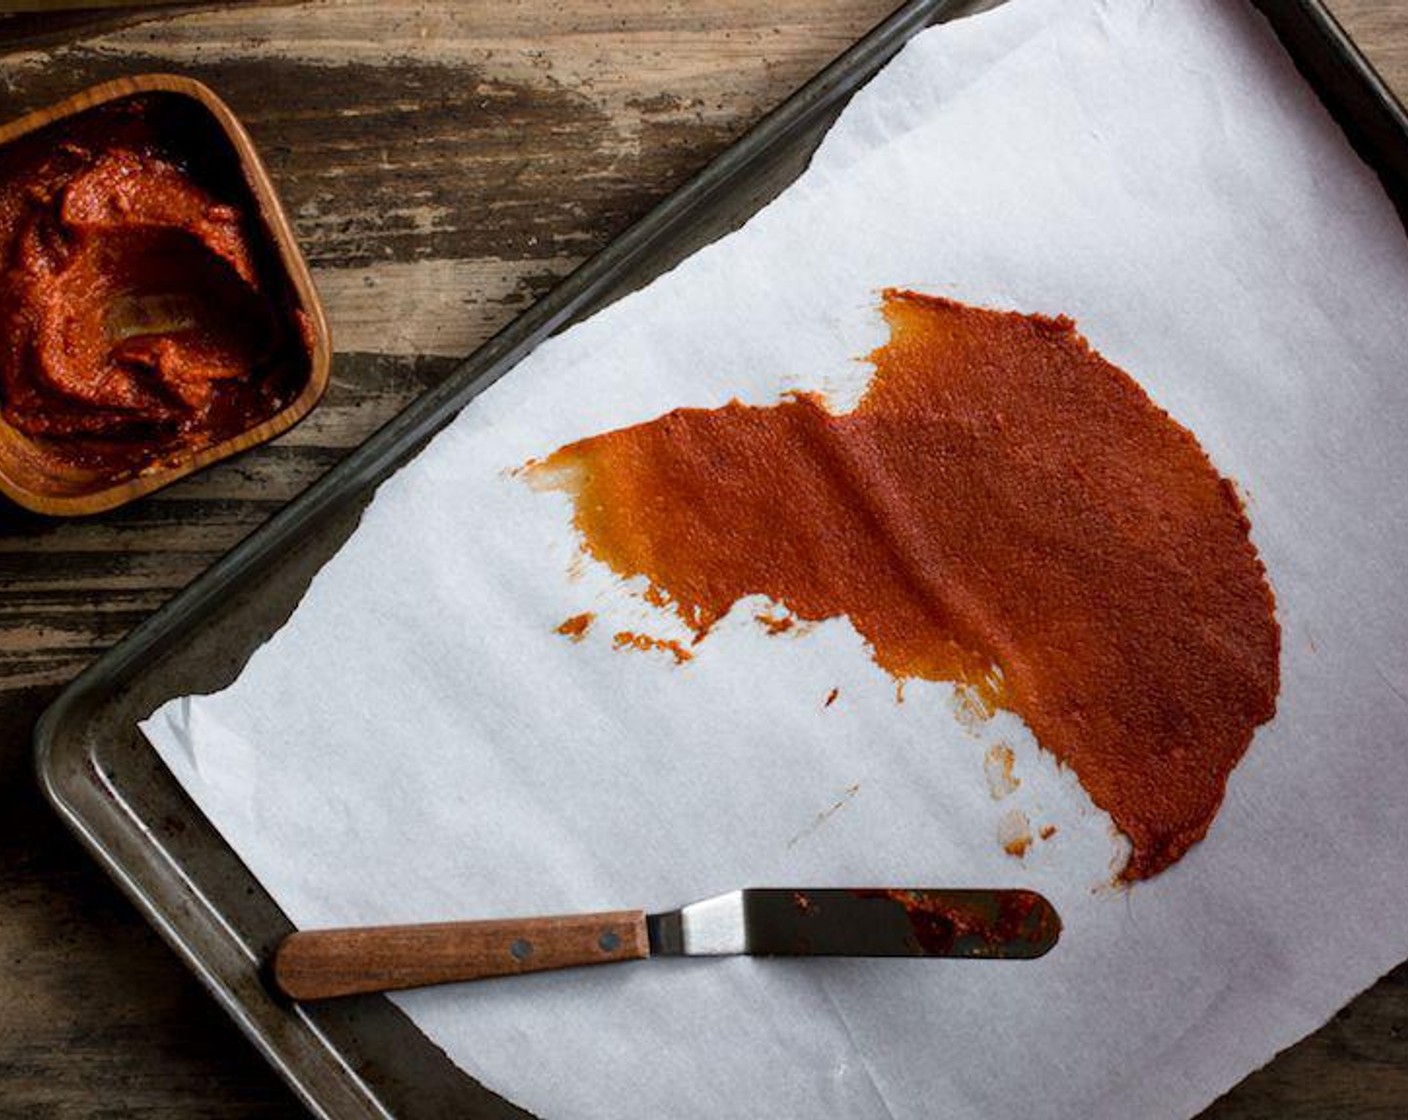 step 1 In a small bowl, combine the Miso Paste (3 Tbsp) and Gochujang (1 1/2 Tbsp) together. Put a piece of parchment paper into a cookie sheet and spread the paste thinly, 1 millimeter thick, onto the parchment paper.